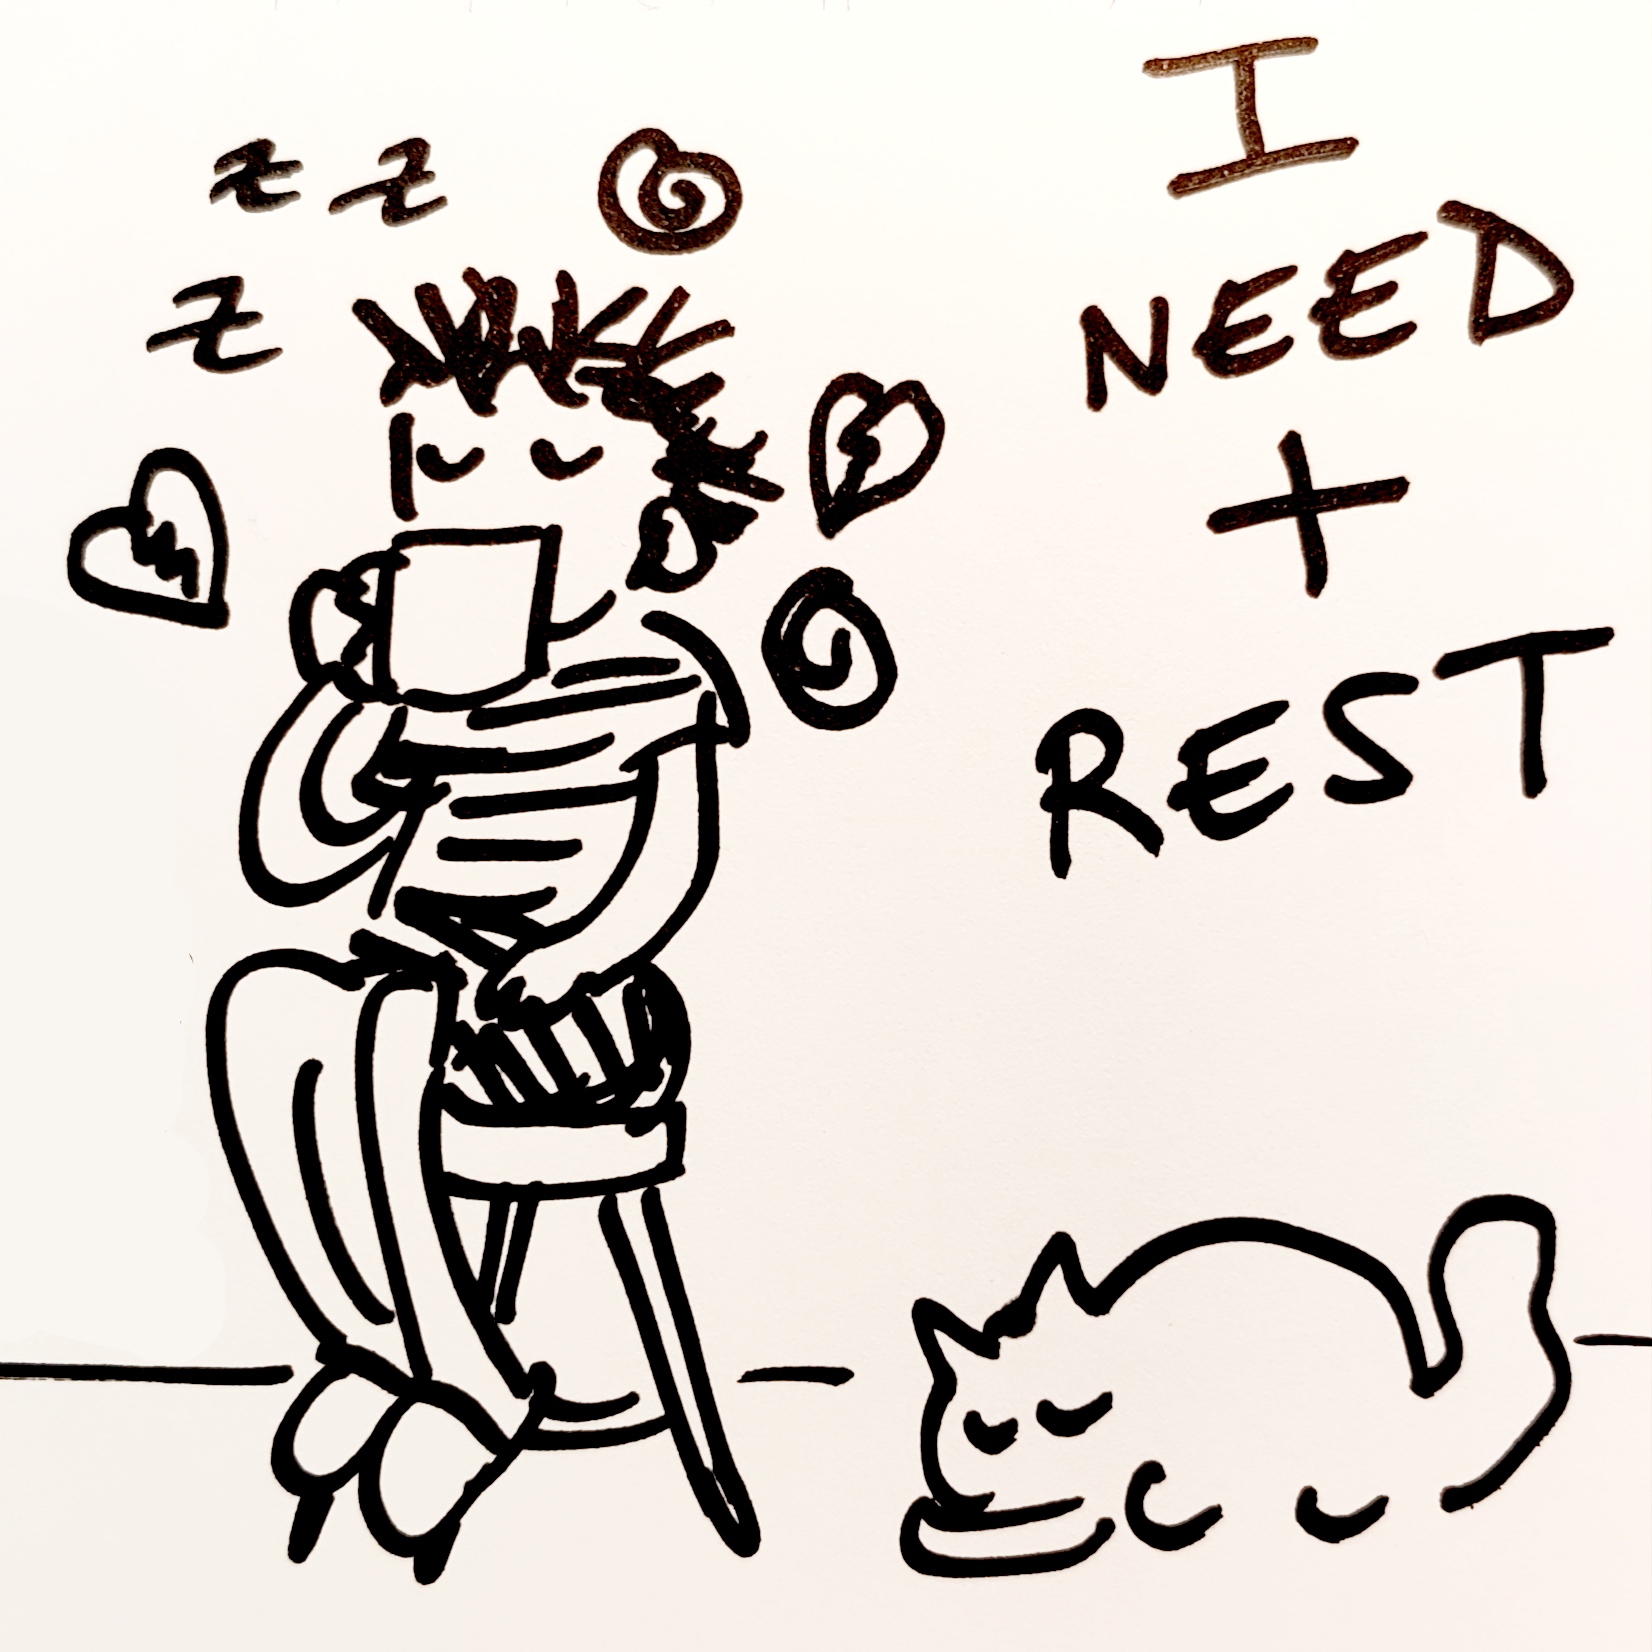 Rest for healing